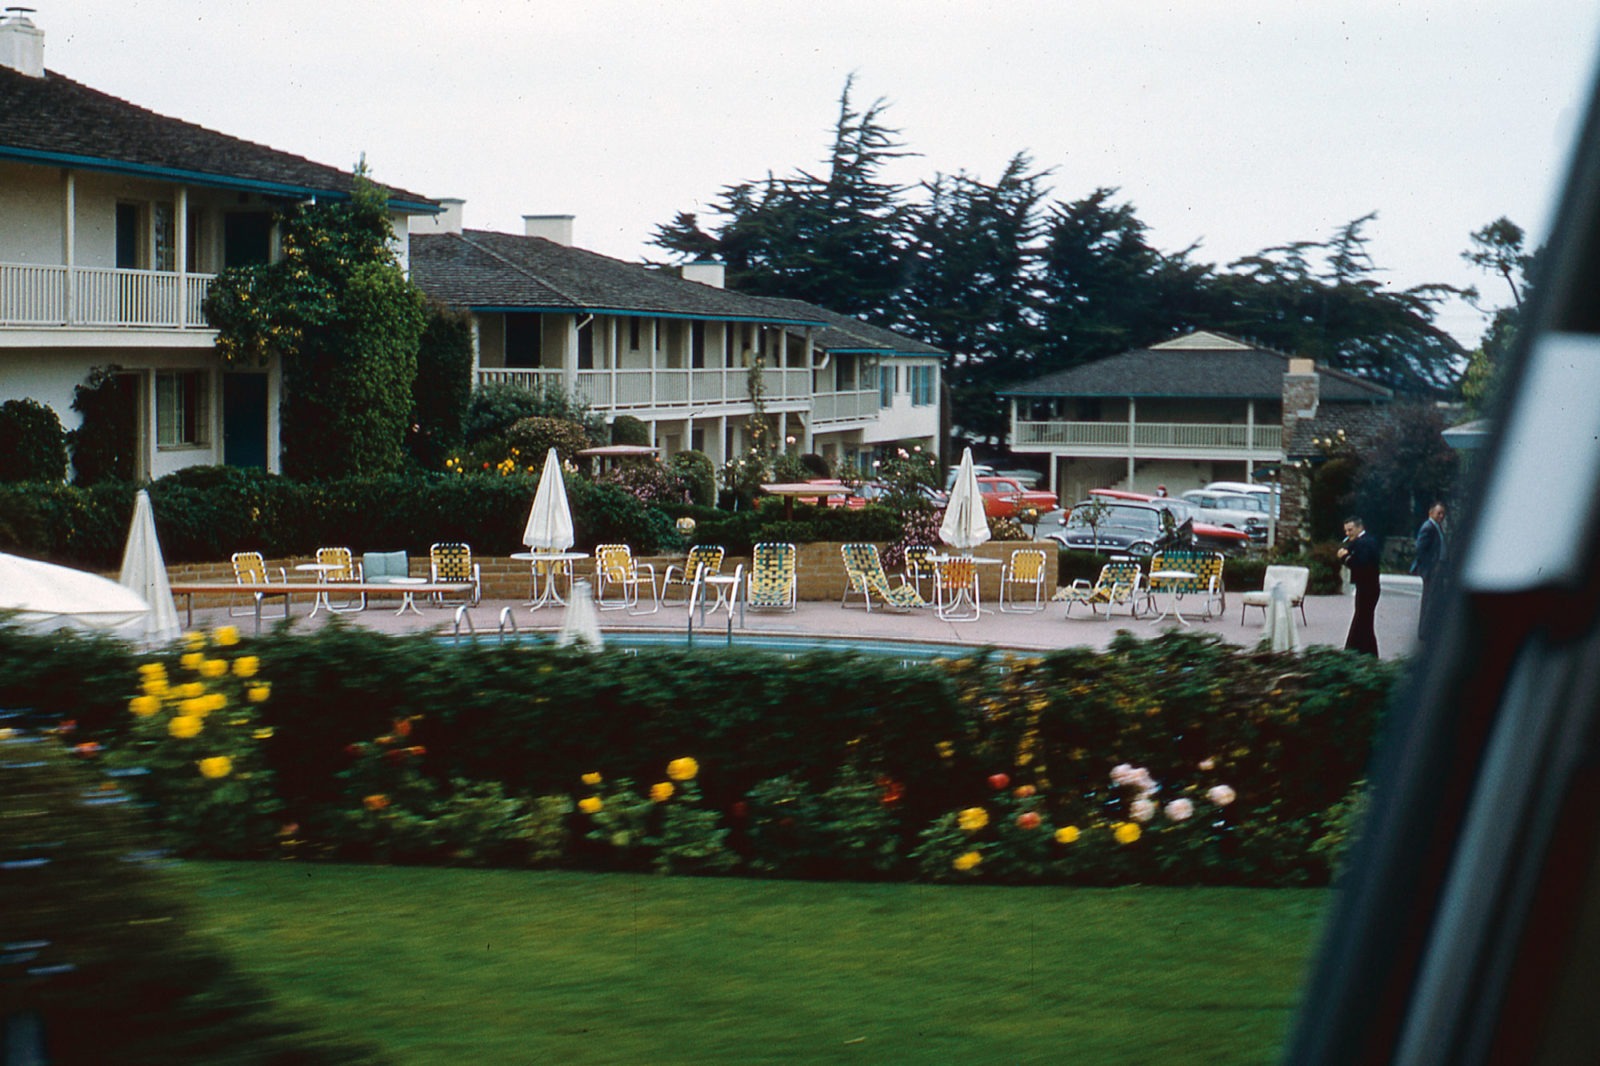 A motel with a pool behind leafy bushes and yellow flowers, photographed through a car window.